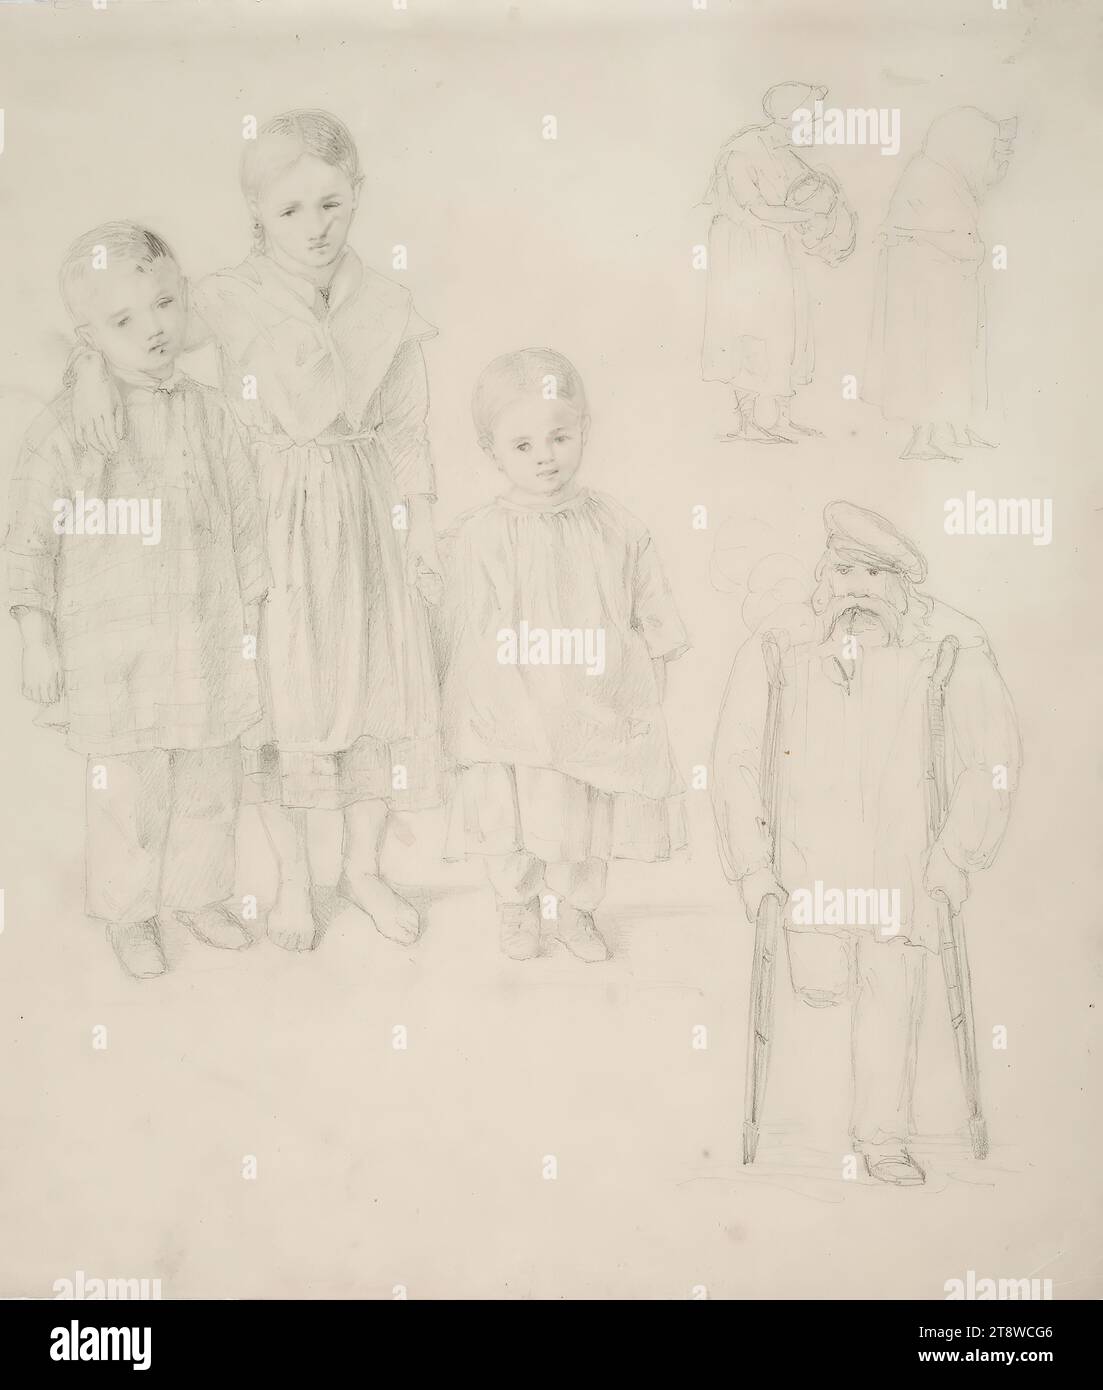 Anders Ekman, 30.3.1833, Vyborg, 1.12.1855, Düsseldorf, Germany, Rehearsal of a group of three children, an old man on crutches and two old grandmothers, 1845 - 1855, 26.5 × 23 cm, pencil Stock Photo